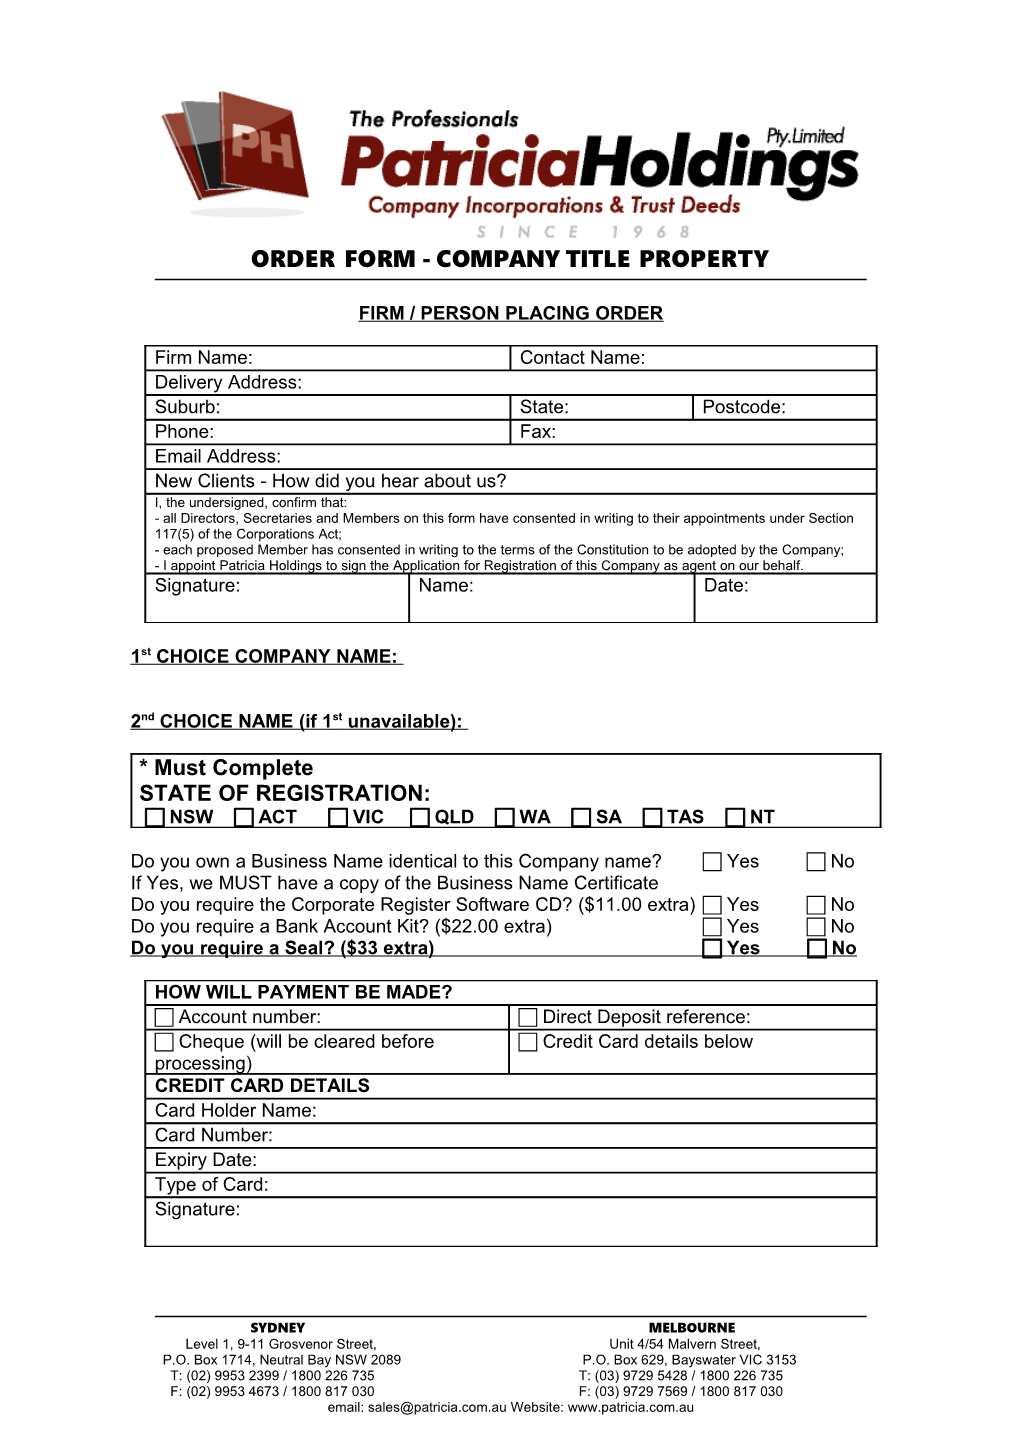 Order Form - Company Title Property